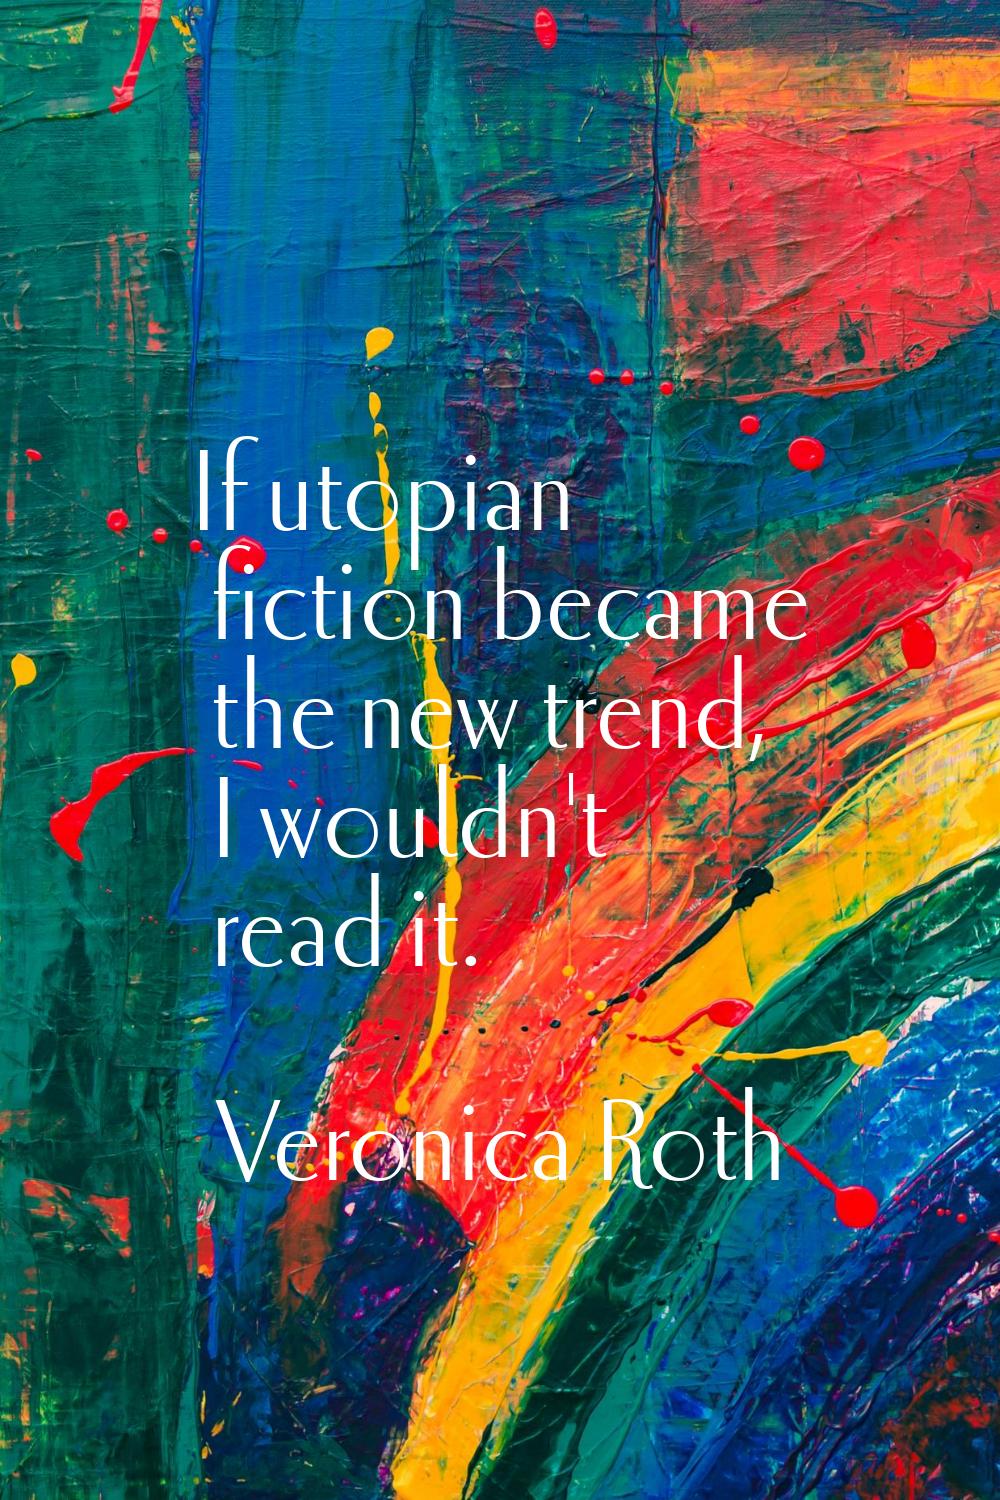 If utopian fiction became the new trend, I wouldn't read it.